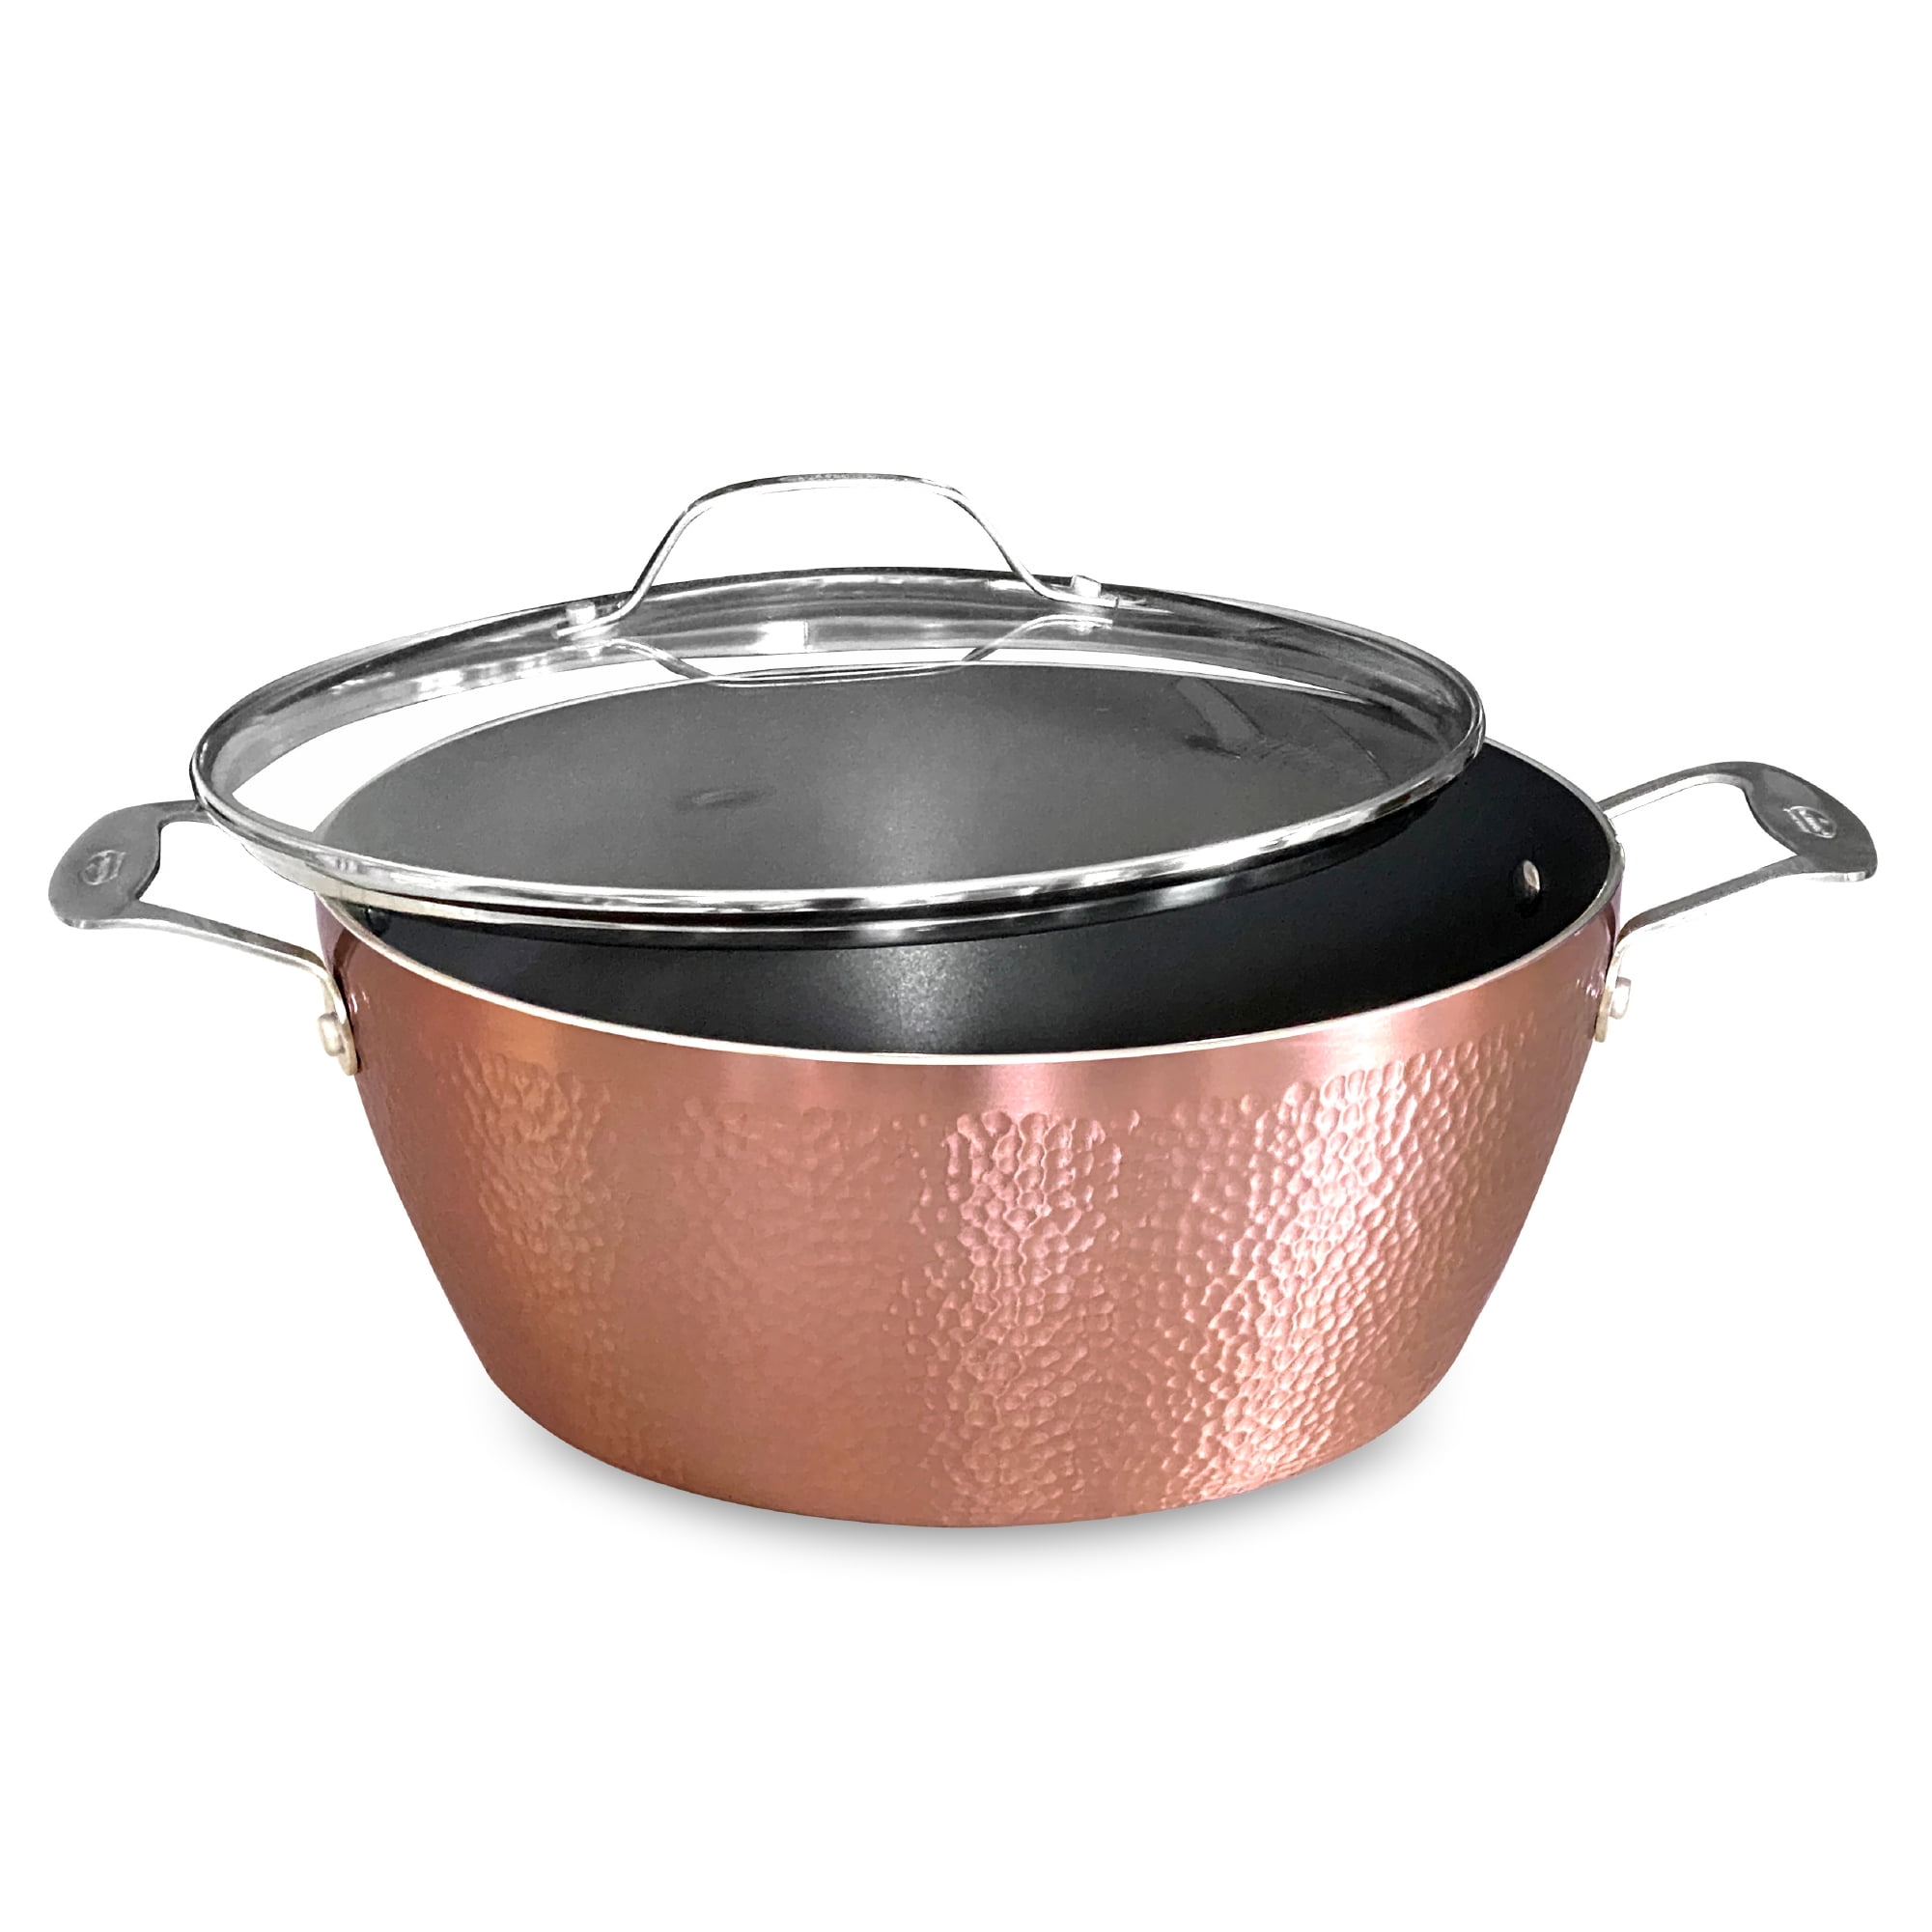 OrGREENiC 8 inch Hammered Rose Gold with Lid - On Sale - Bed Bath & Beyond  - 32877073